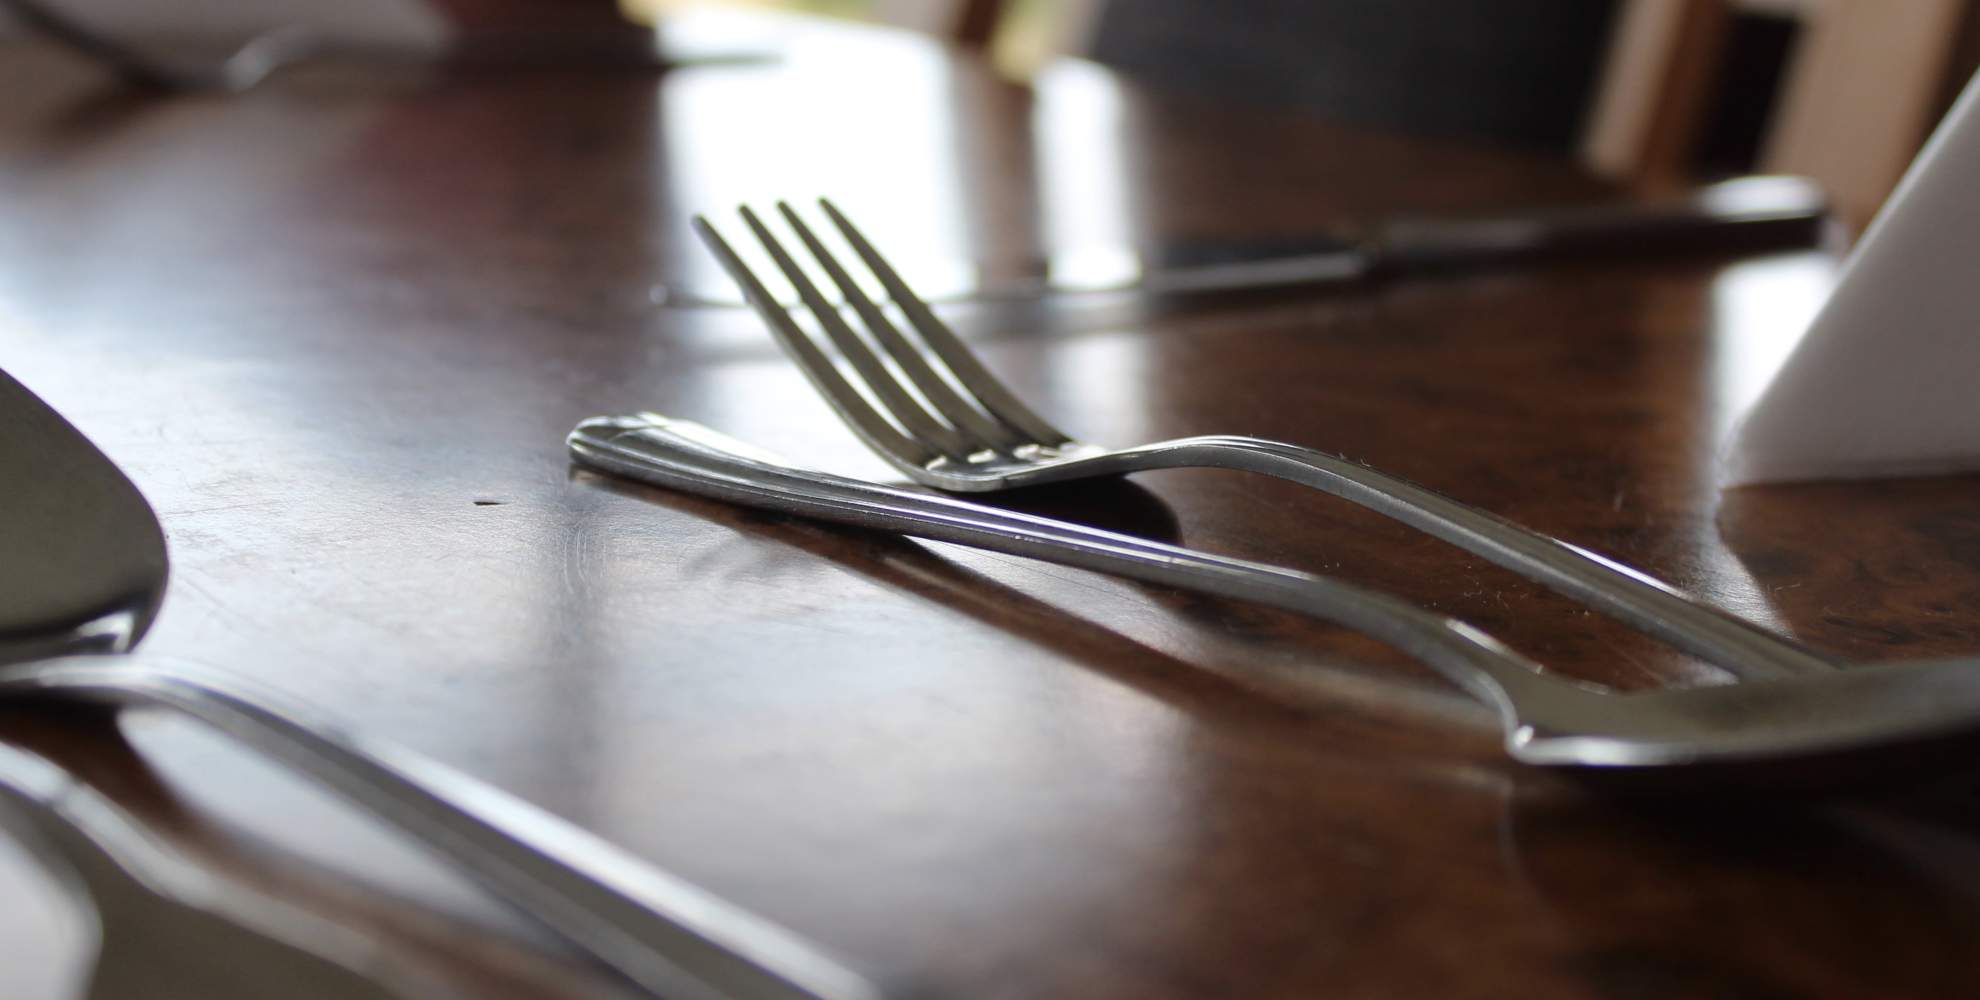 An image of a knife and fork set on a table